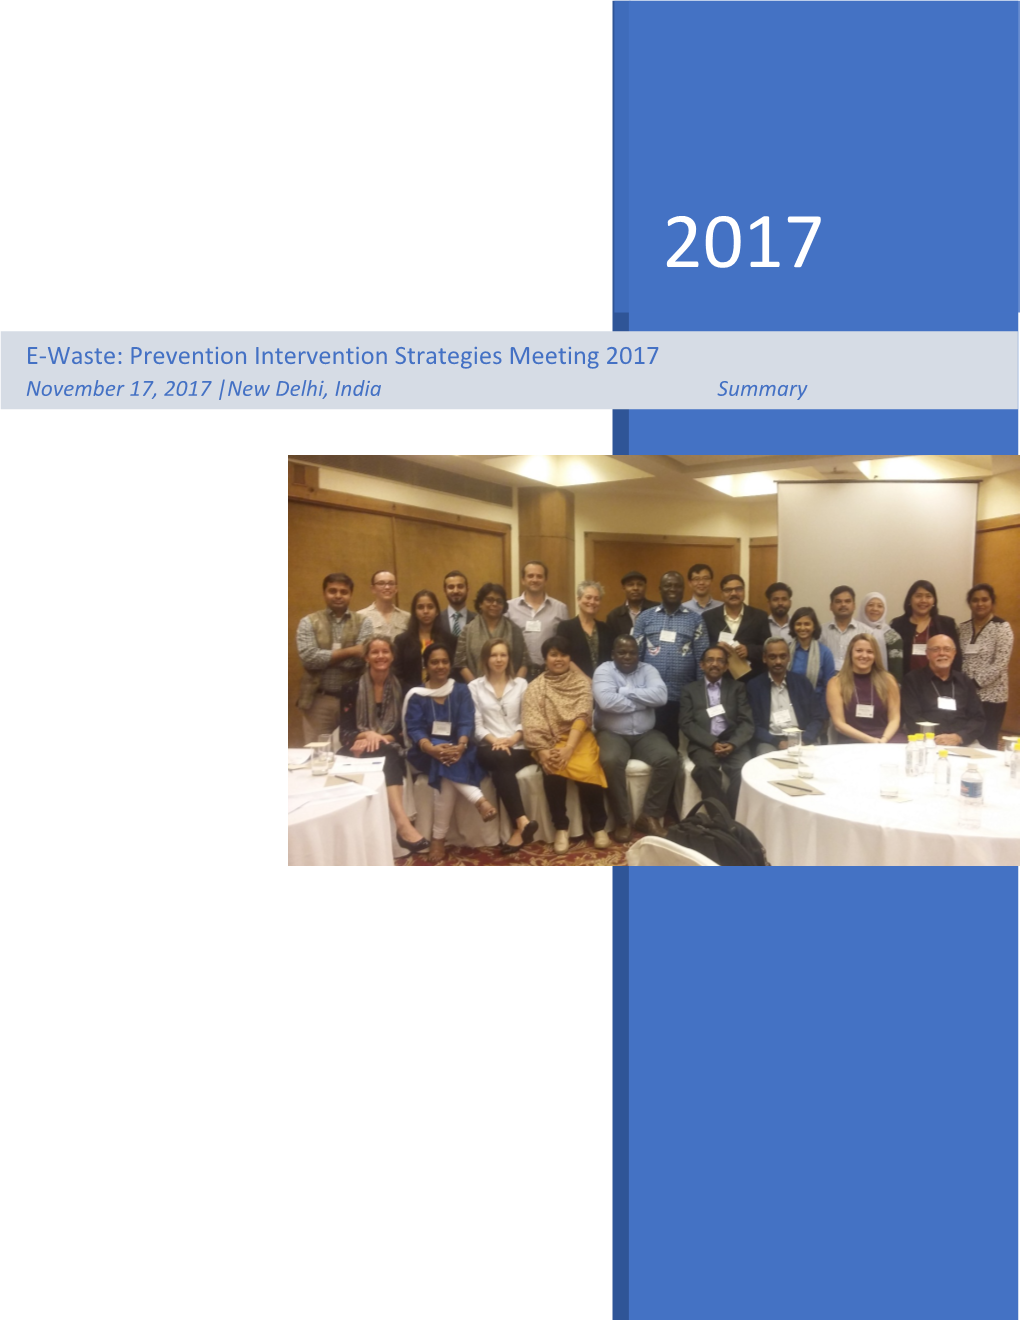 E-Waste Prevention Intervention Strategies Meeting Summary Report